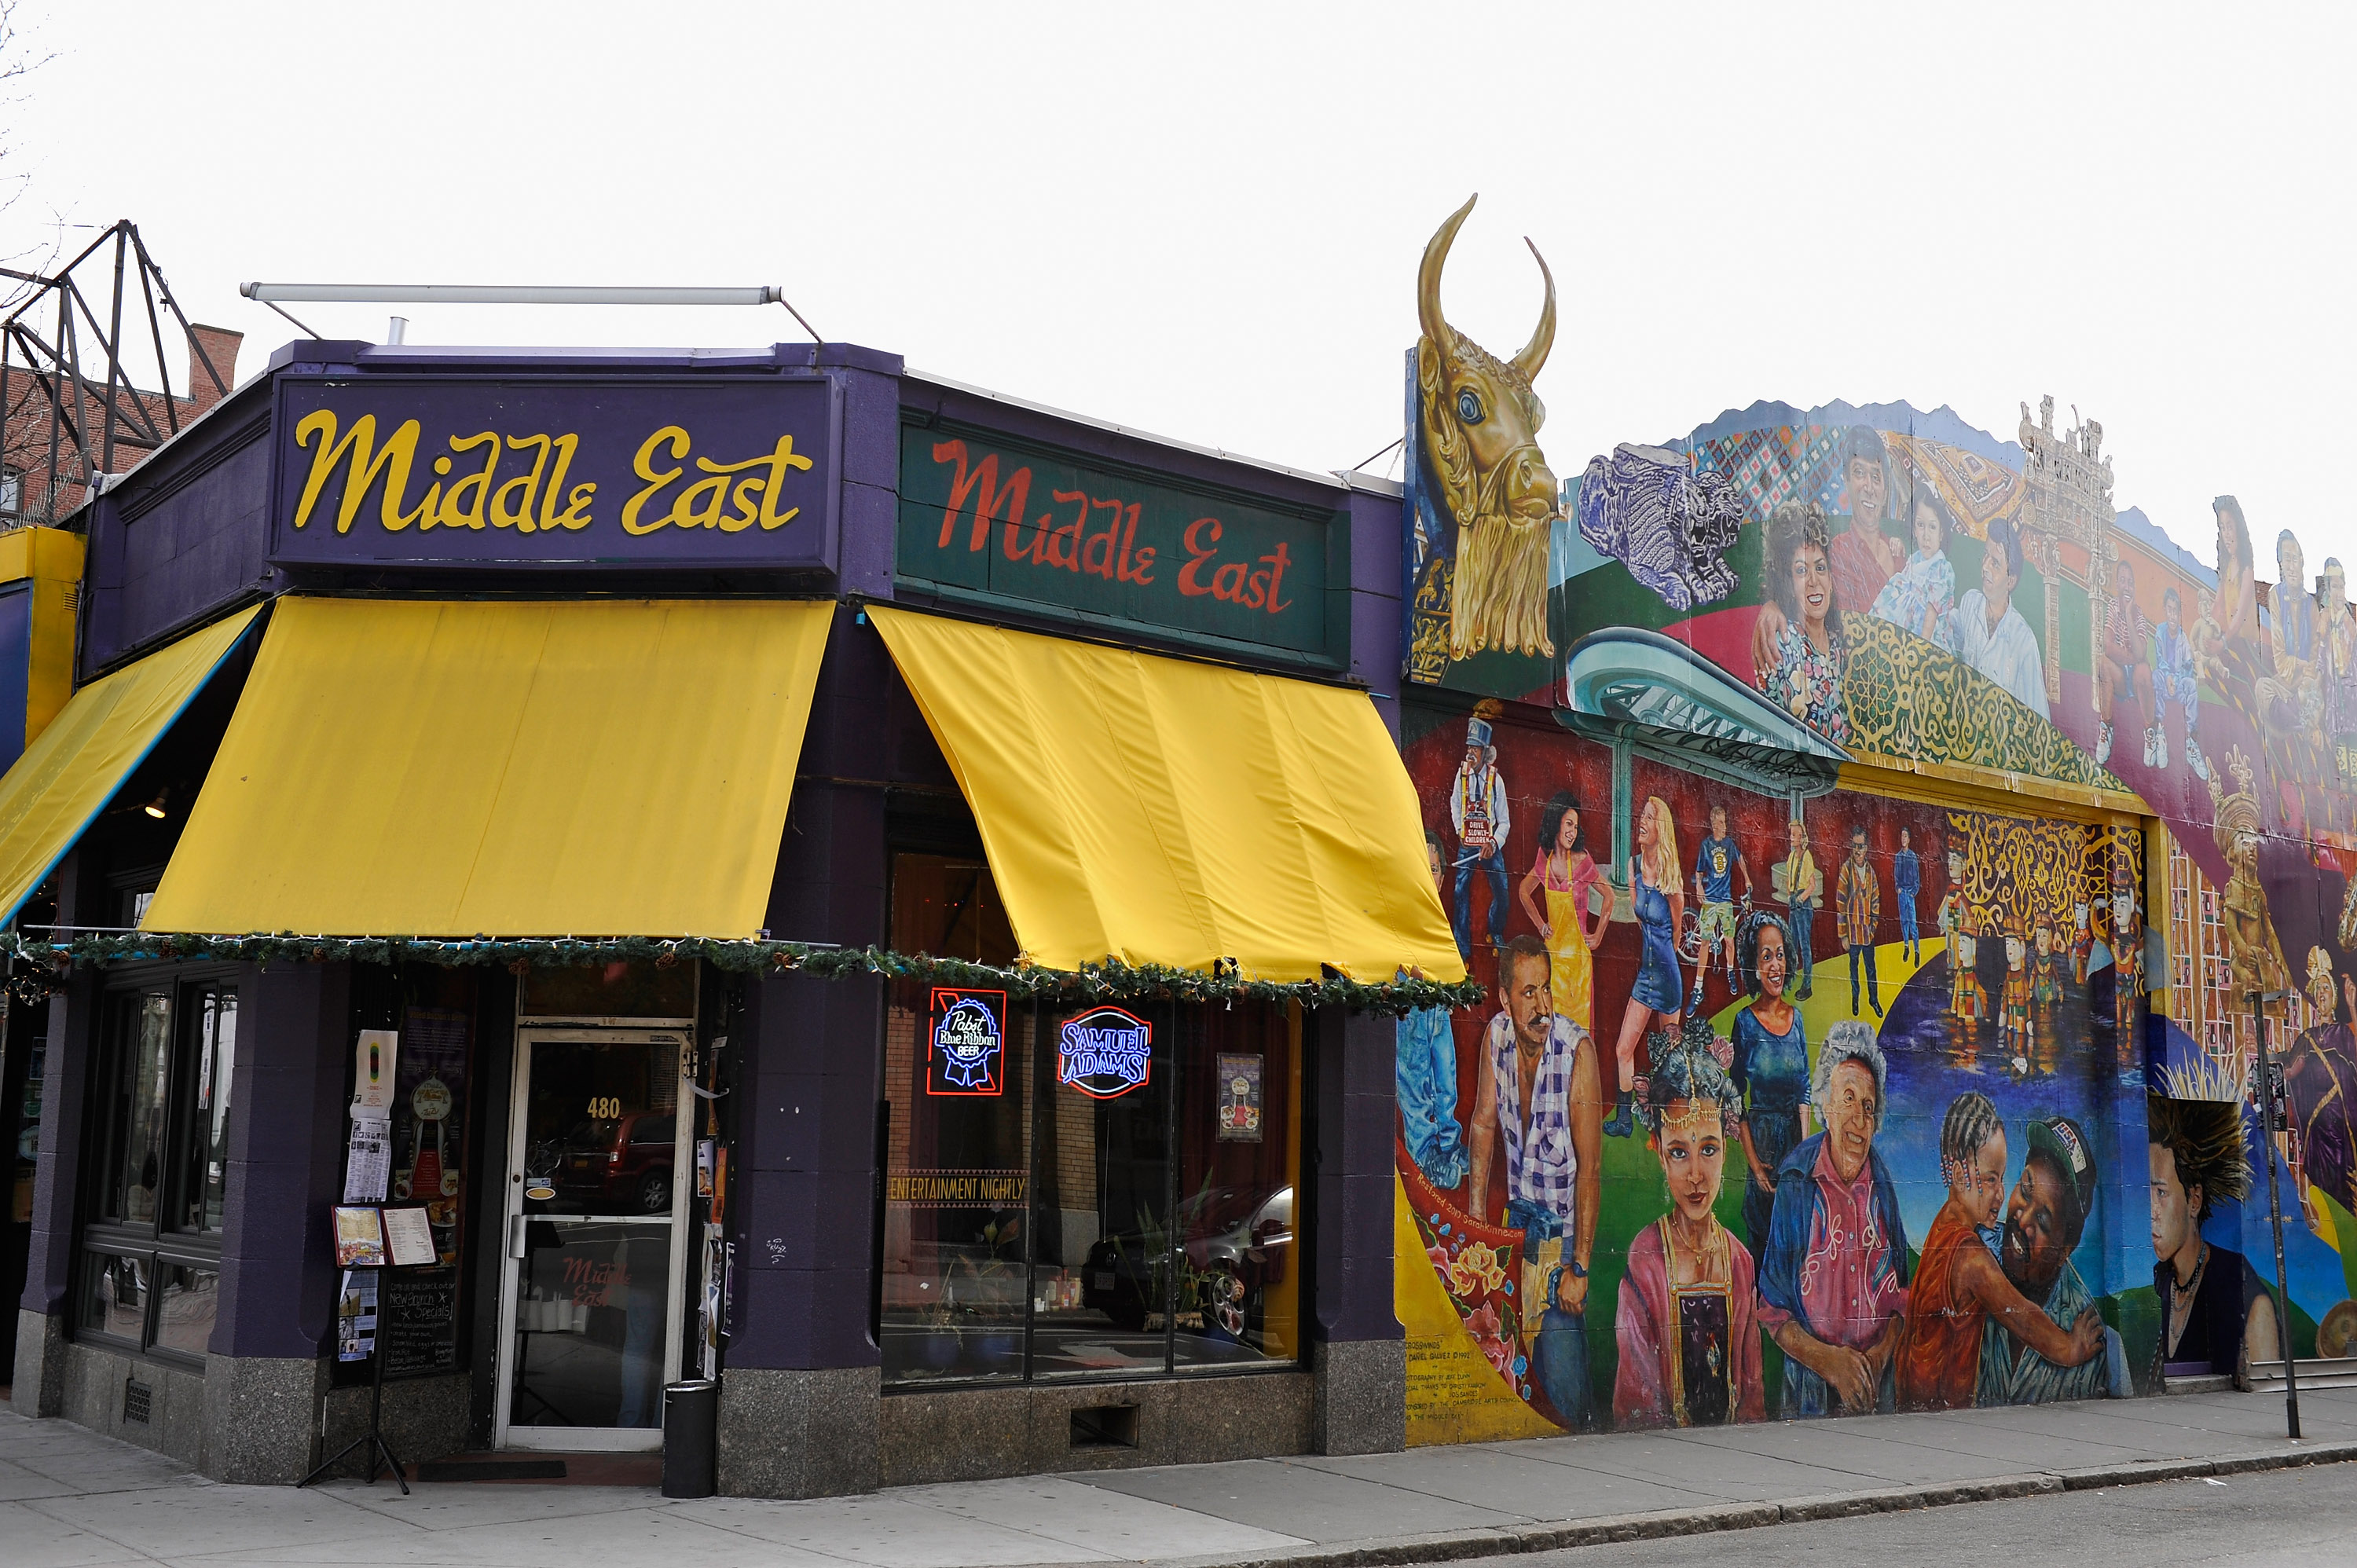 A general view of the renowned Middle East Restaurant and Night Club, a much sought after performance venue for local acts in the Boston area, on March 4, 2013 in Cambridge.